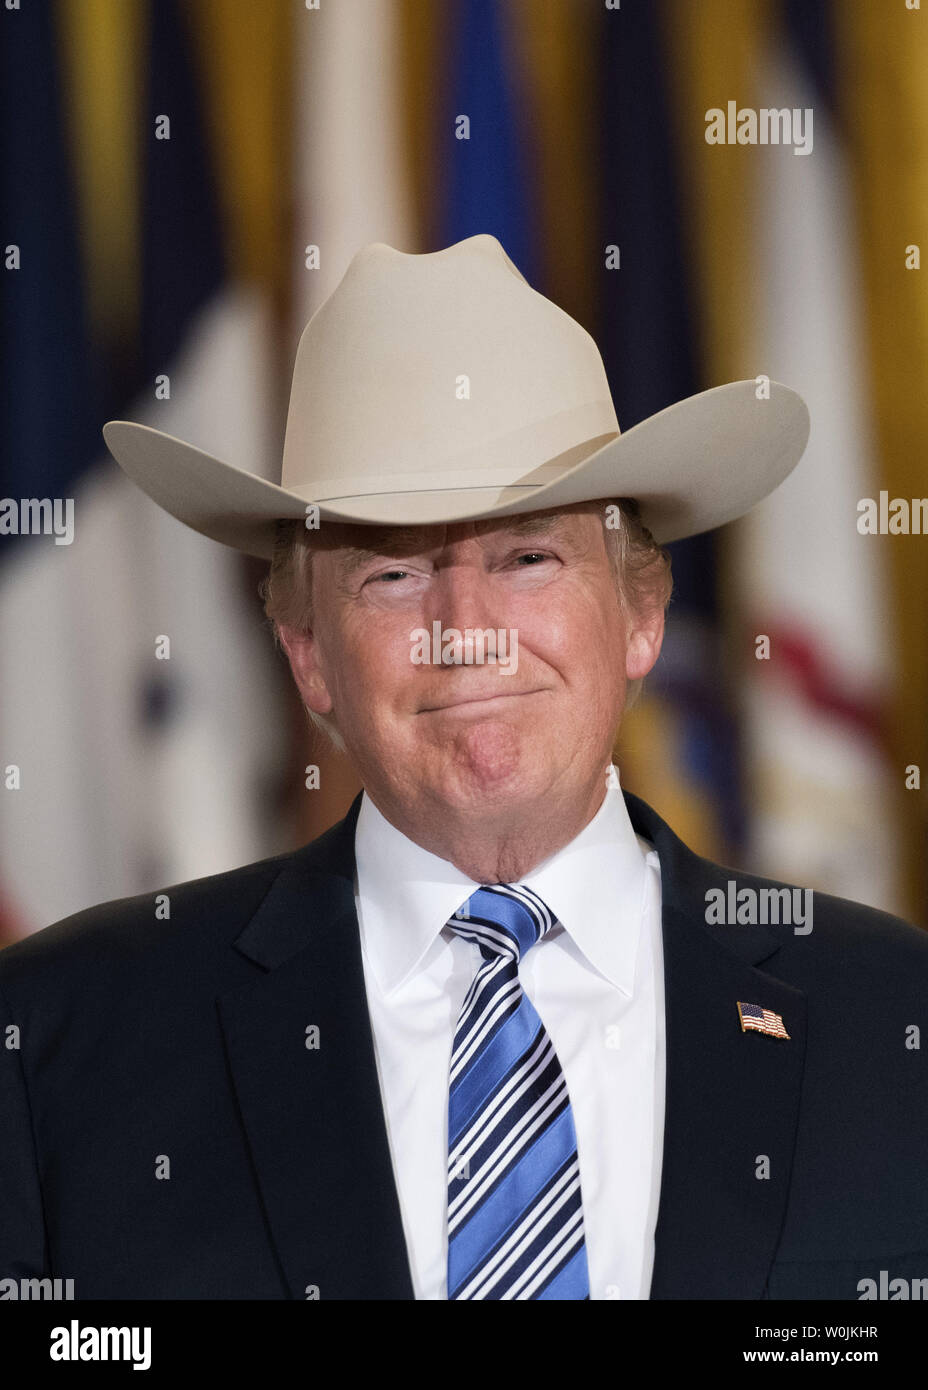 President Donald Trump puts on a Stetson cowboy hat during a Made in  America product showcase on Made in America day at the White House in  Washington, D.C. on July 17, 2017.